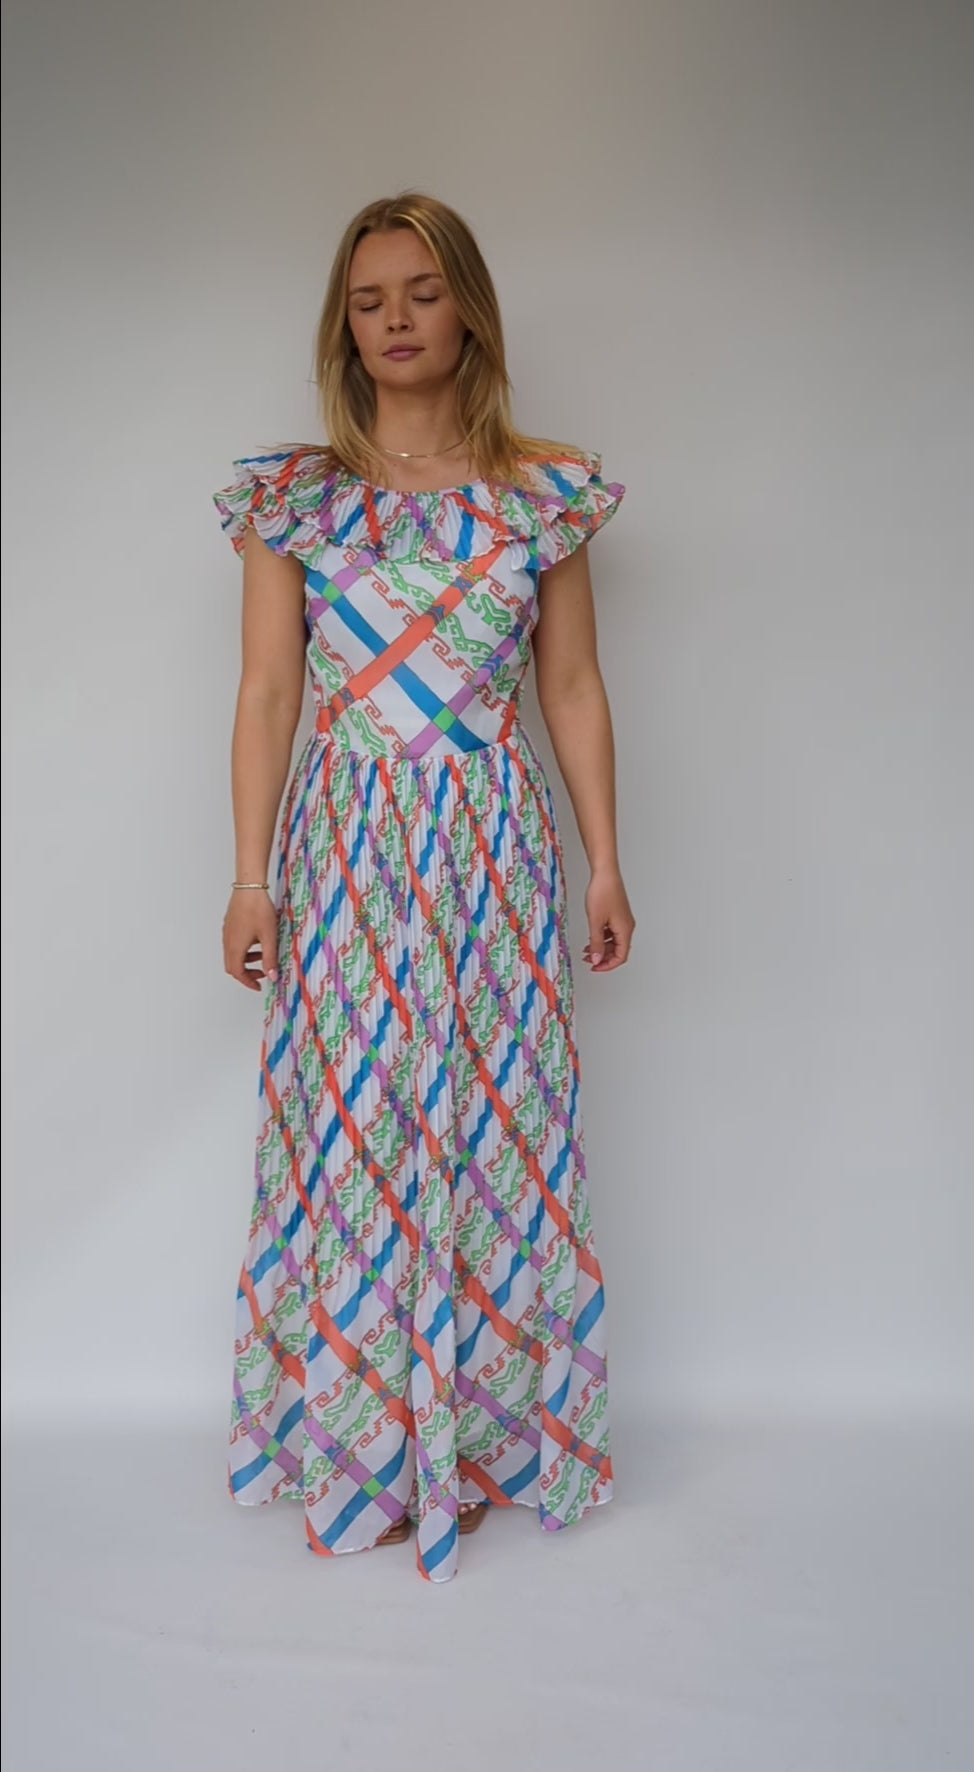 video of vintage 1970s maxi dress with bold pattern of orange, green, blue and purple